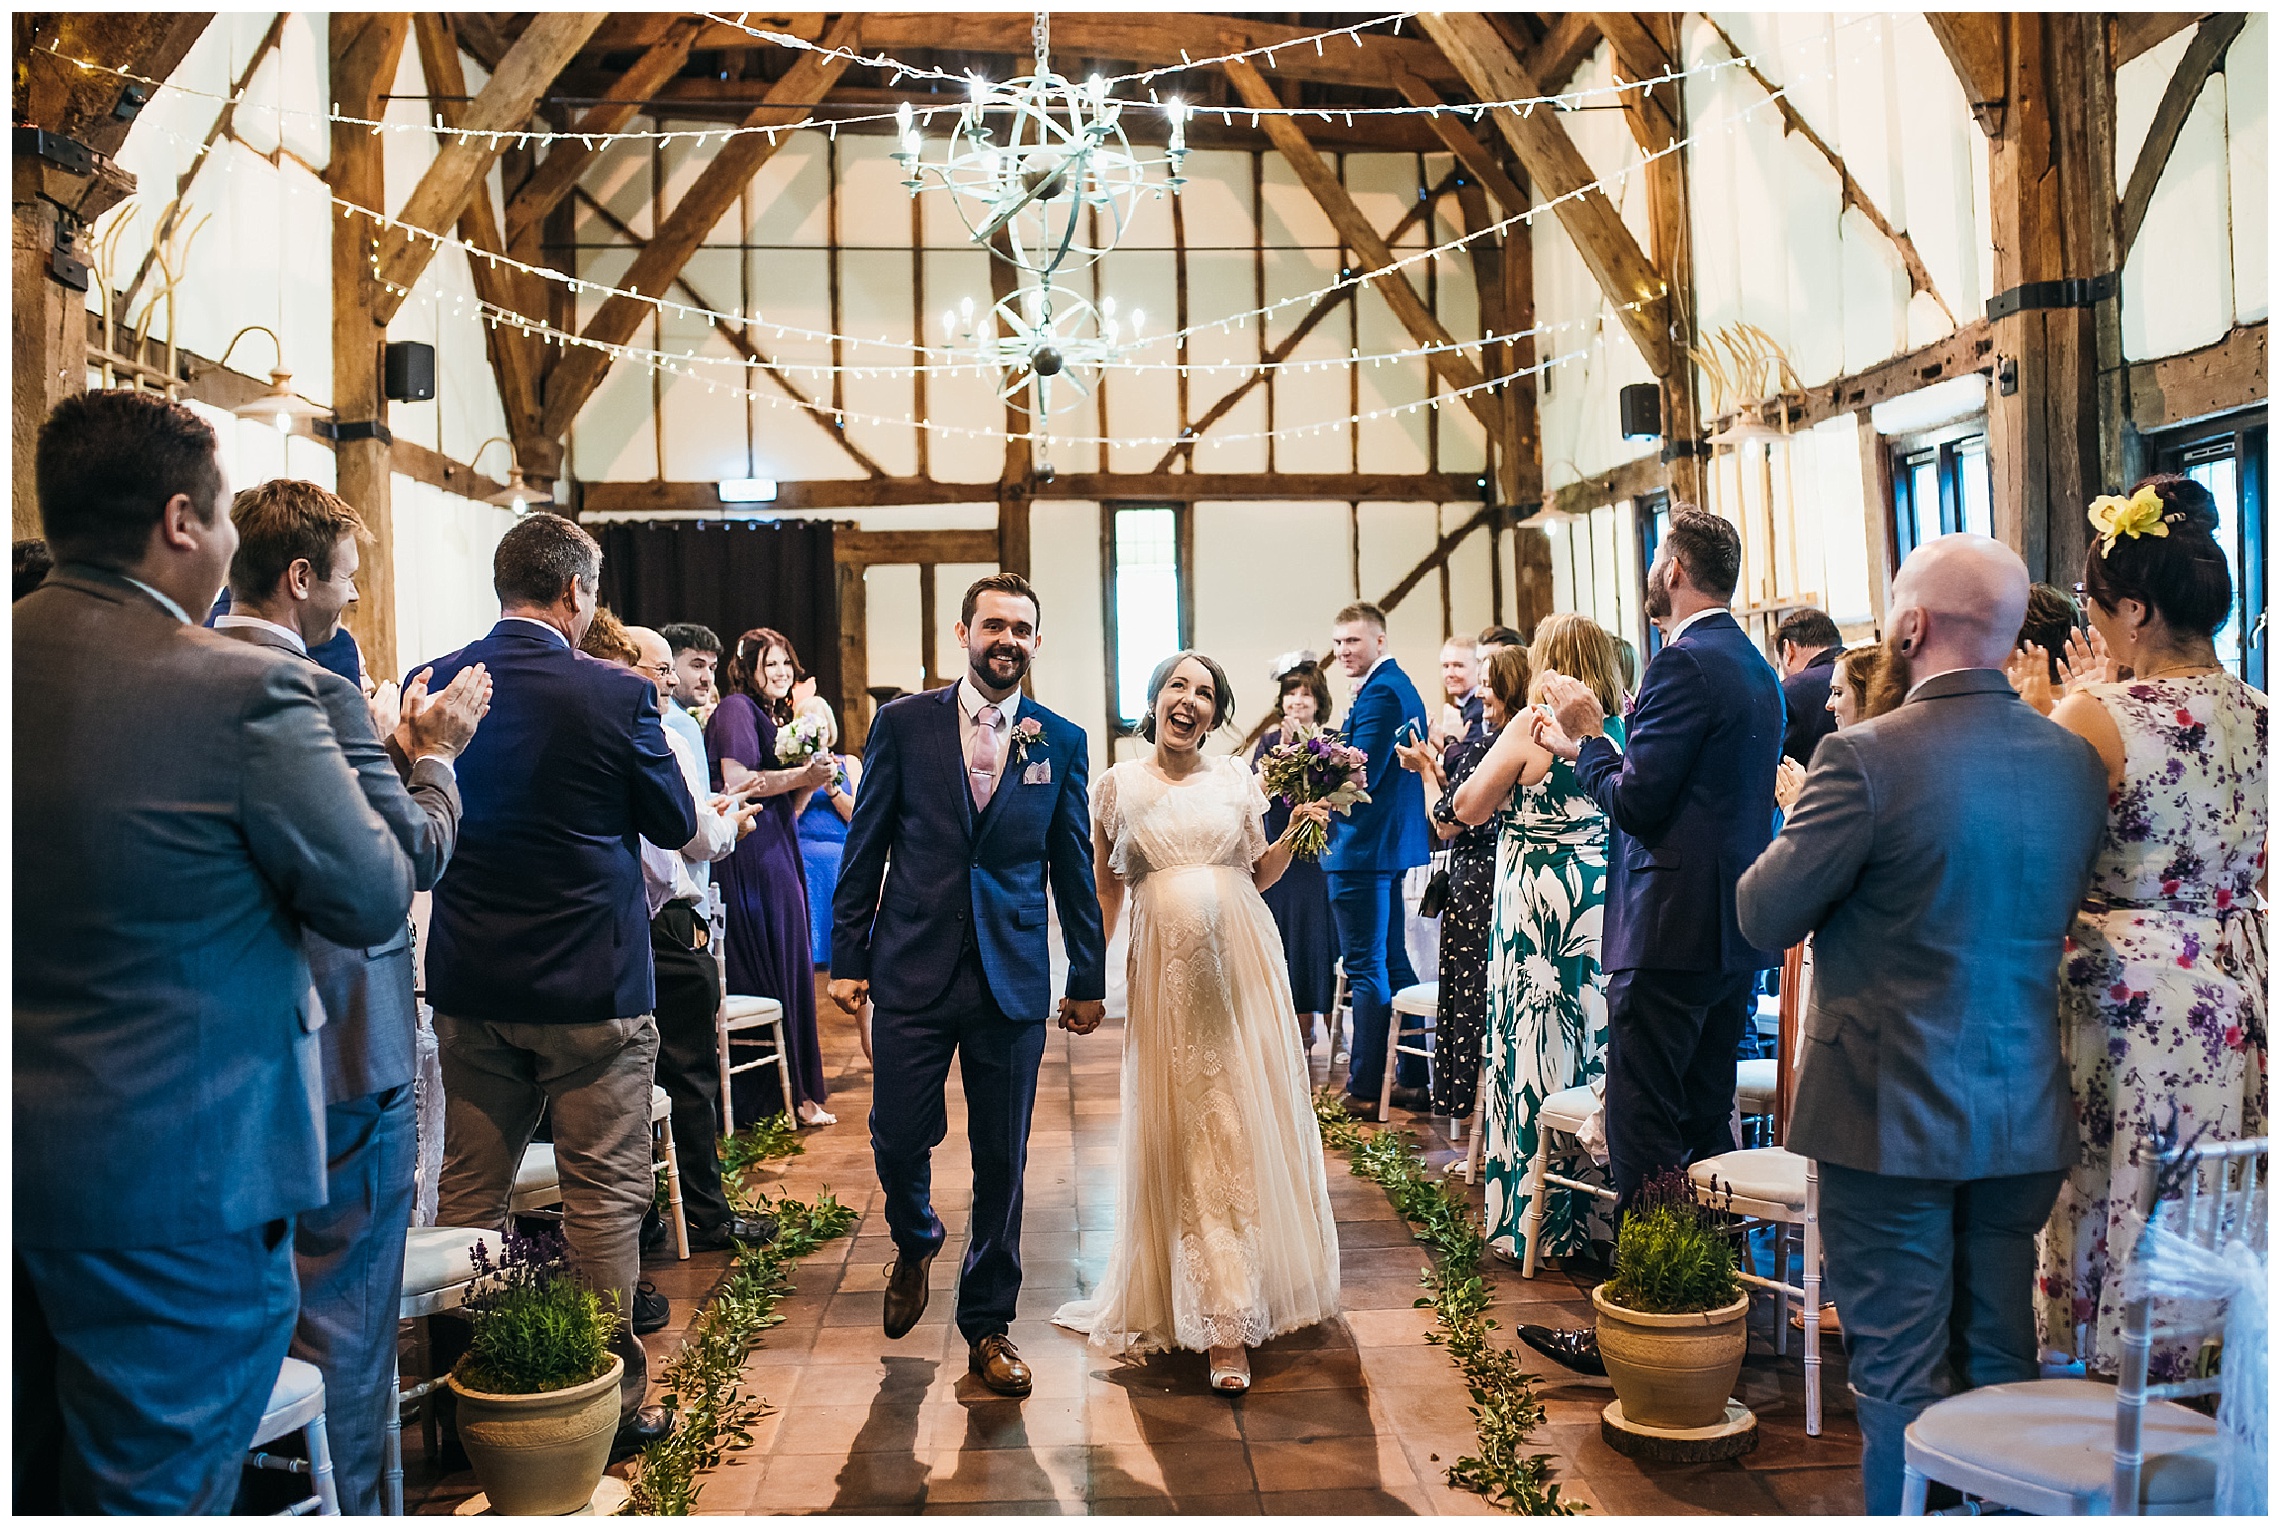 bride and groom walk out of barn wedding venue together smiling